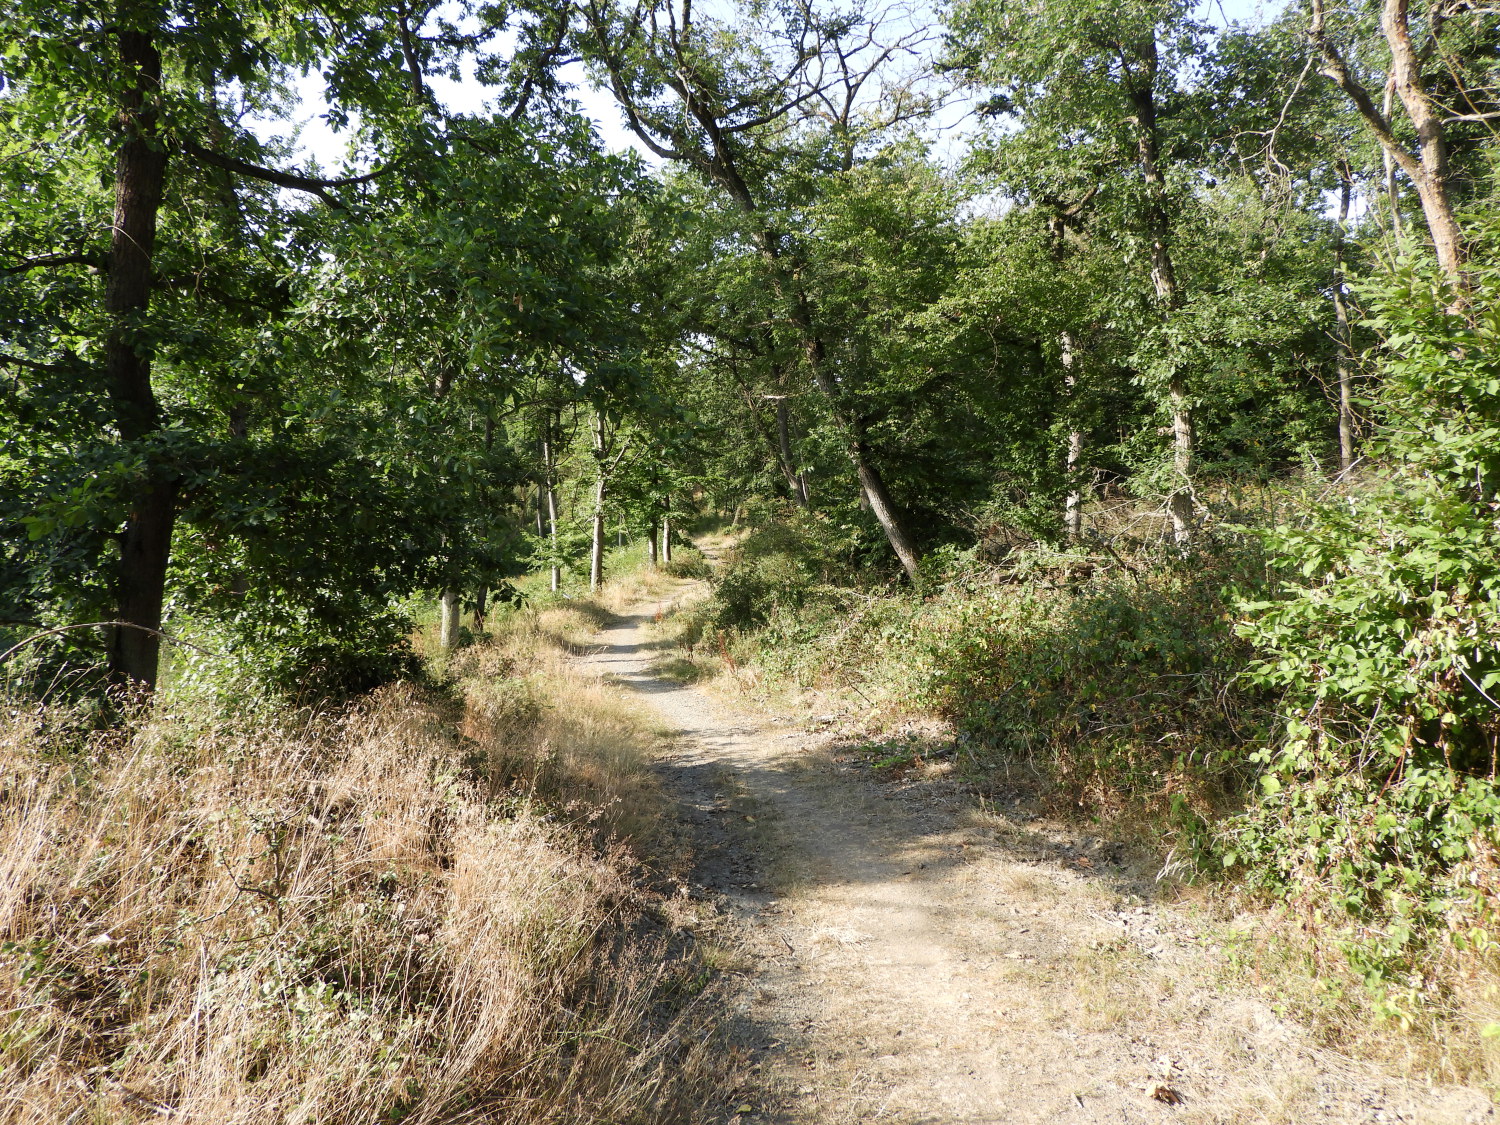 The path from Konigsberg to Vogel